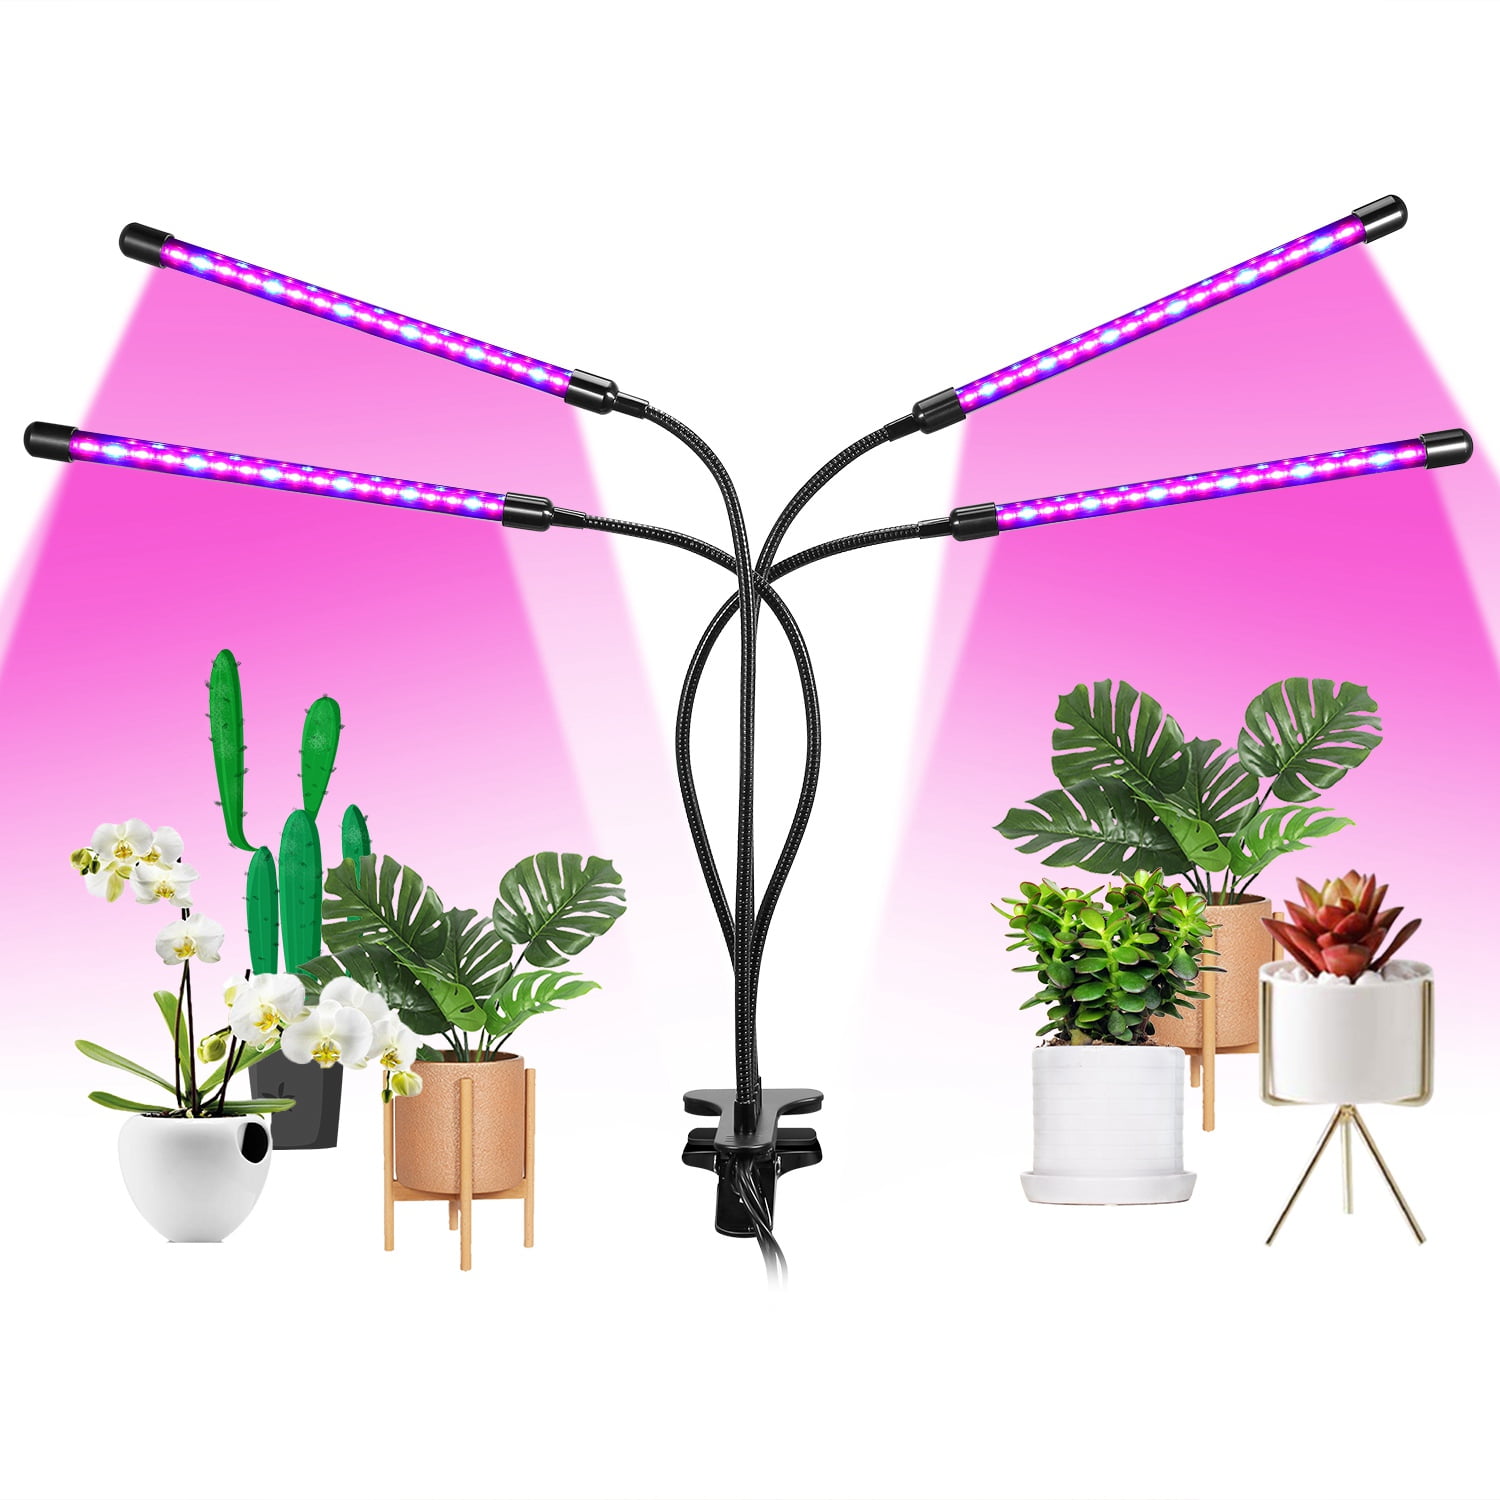 LED Grow Light Adjustable Head 360 Ring Bendable Super Bright with Clamp 